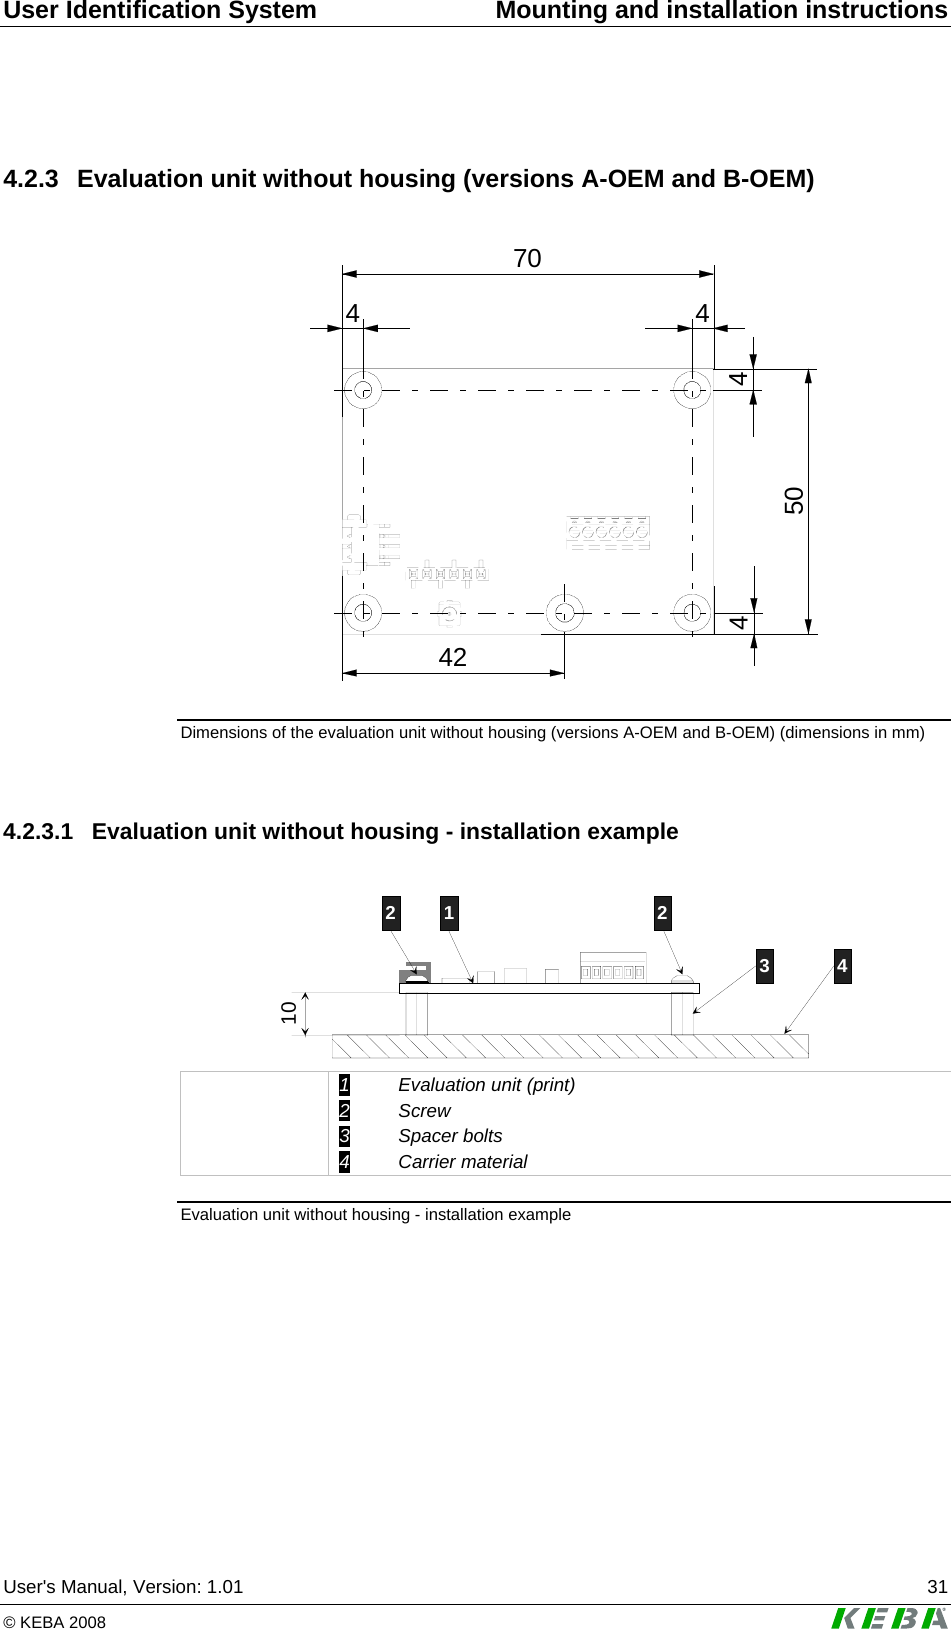 User Identification System  Mounting and installation instructions User&apos;s Manual, Version: 1.01  31 © KEBA 2008   4.2.3  Evaluation unit without housing (versions A-OEM and B-OEM)  4 470424450 Dimensions of the evaluation unit without housing (versions A-OEM and B-OEM) (dimensions in mm)  4.2.3.1  Evaluation unit without housing - installation example  101 23 42  1 Evaluation unit (print) 2 Screw 3 Spacer bolts 4 Carrier material Evaluation unit without housing - installation example  